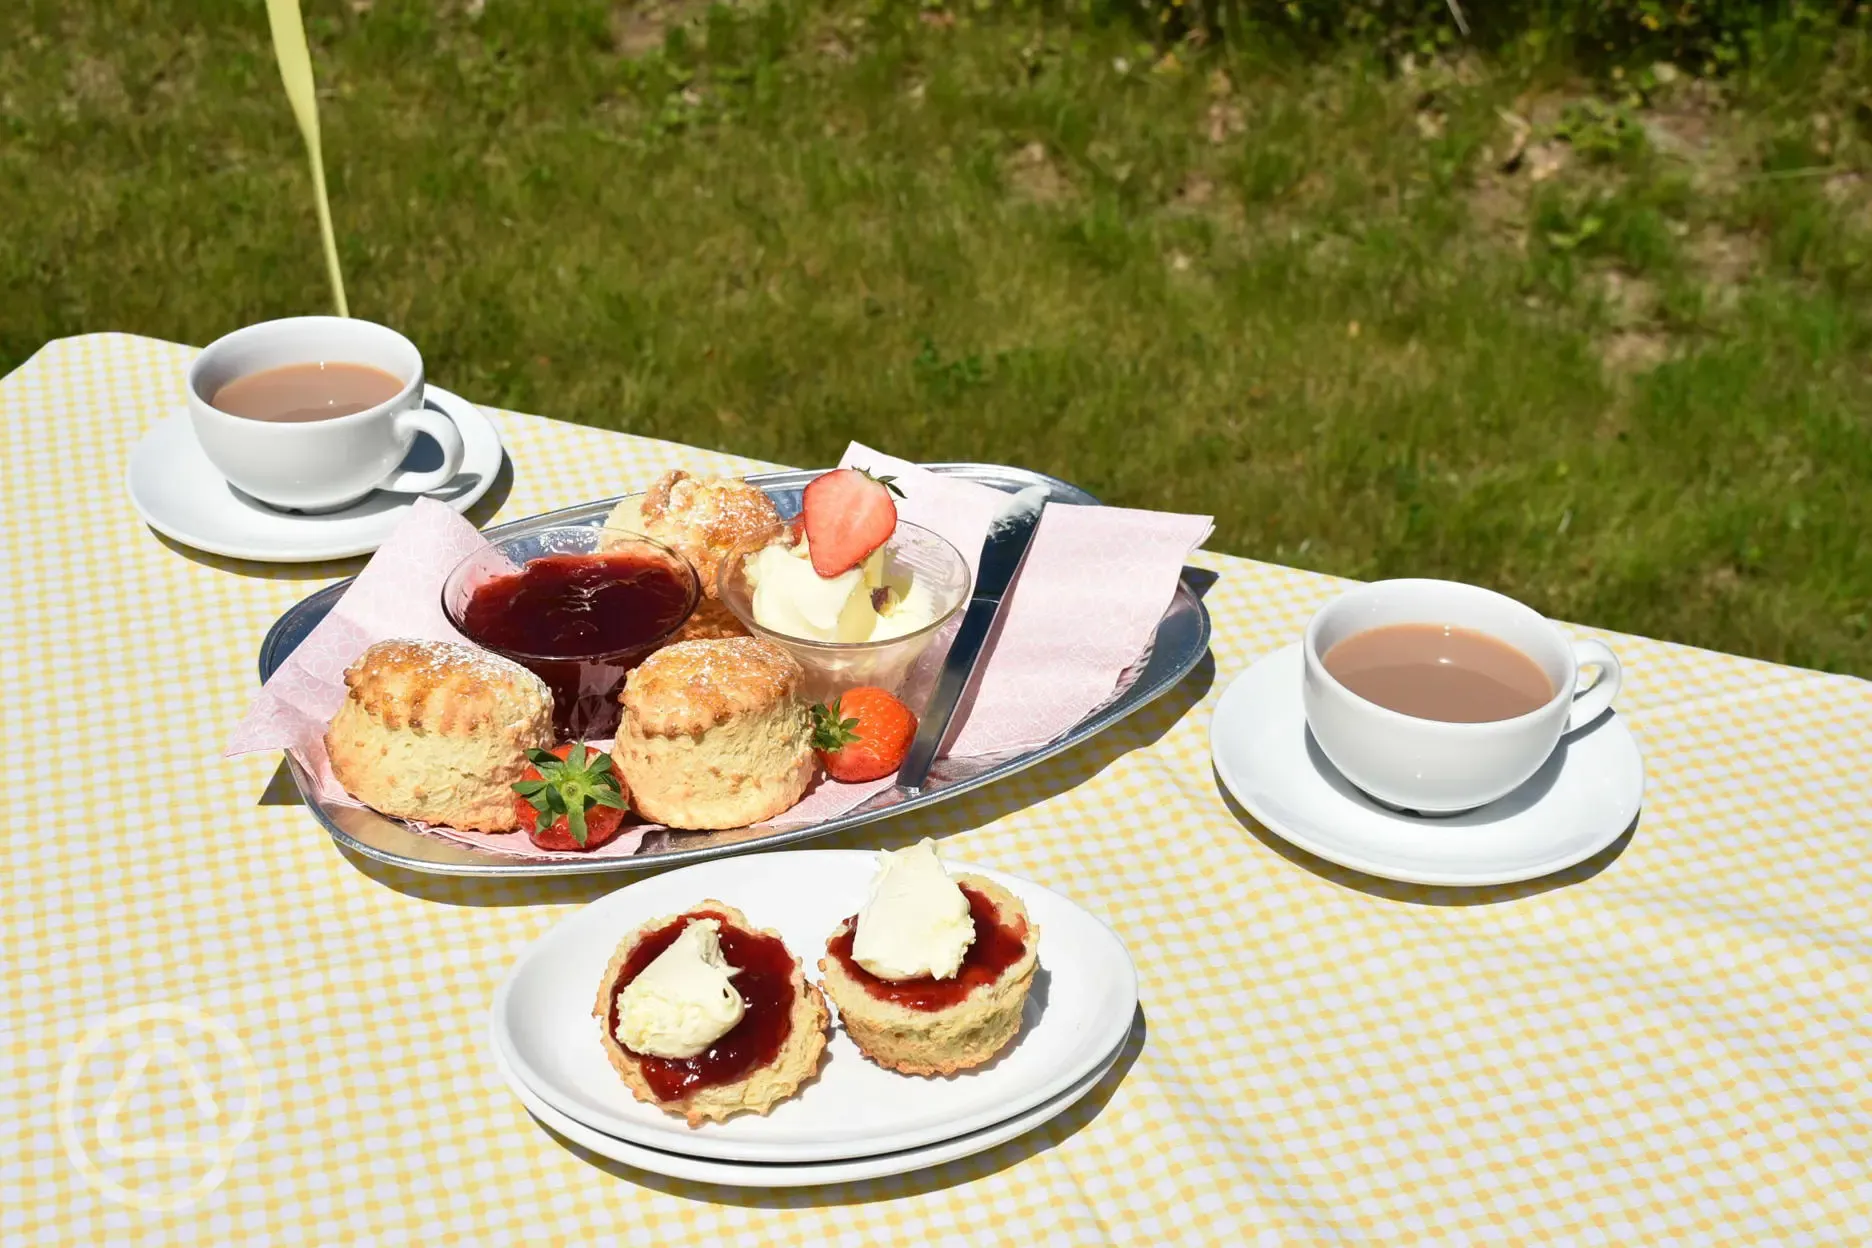 Why not treat yourself to a scrumptious Cream Tea!